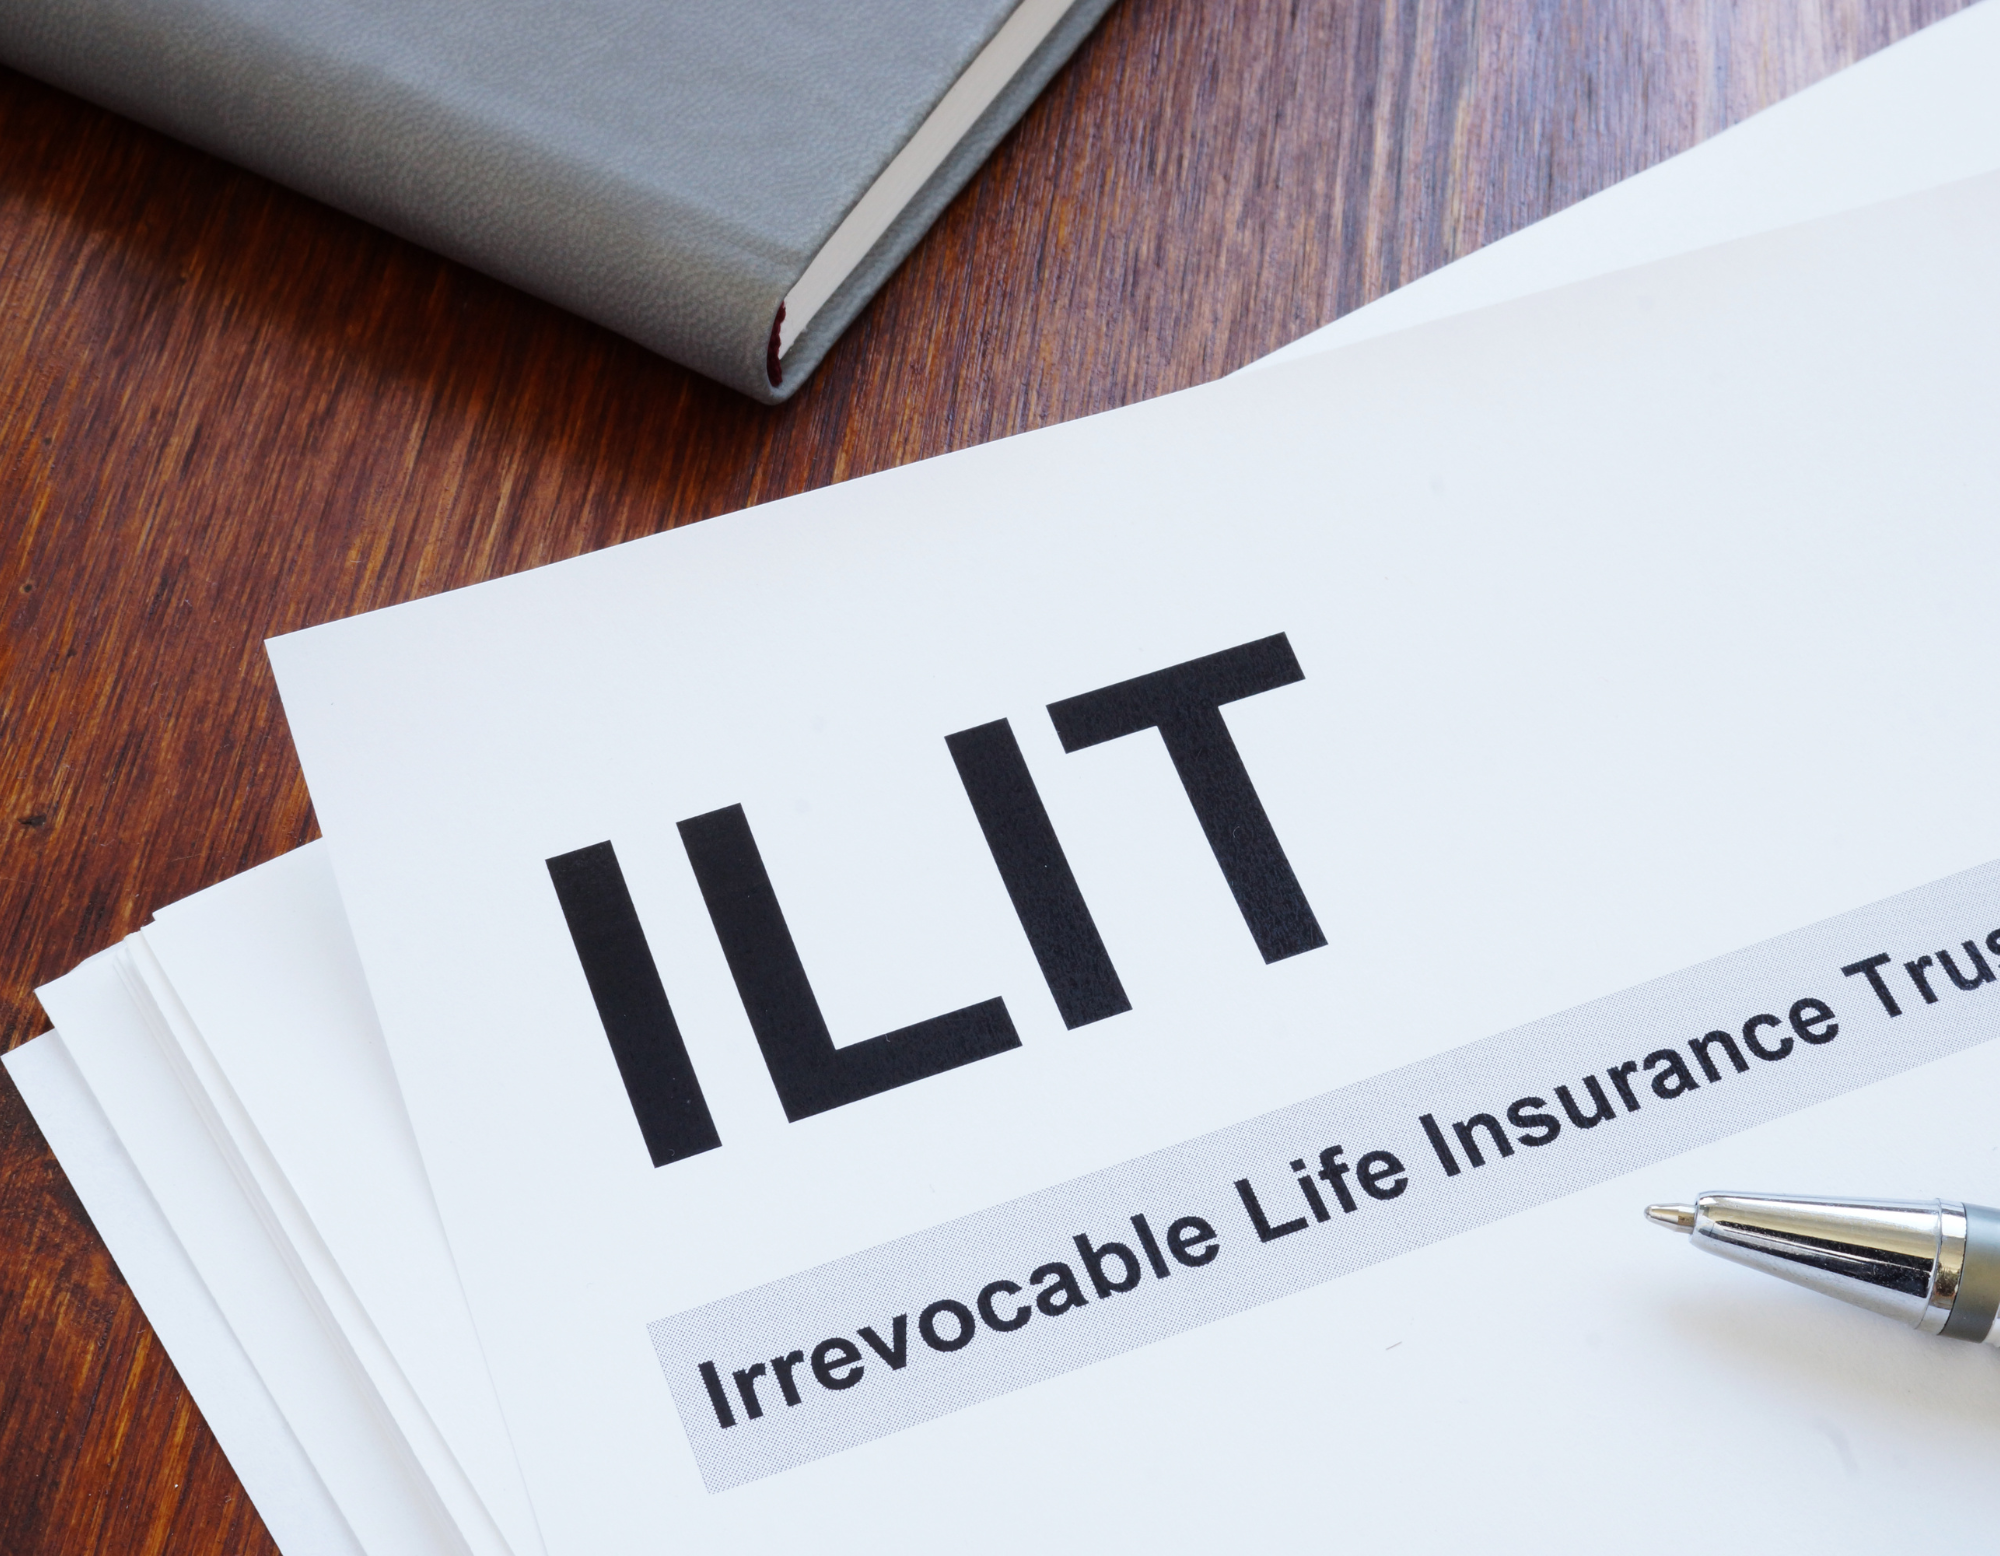 What Are Irrevocable Life Insurance Trusts?